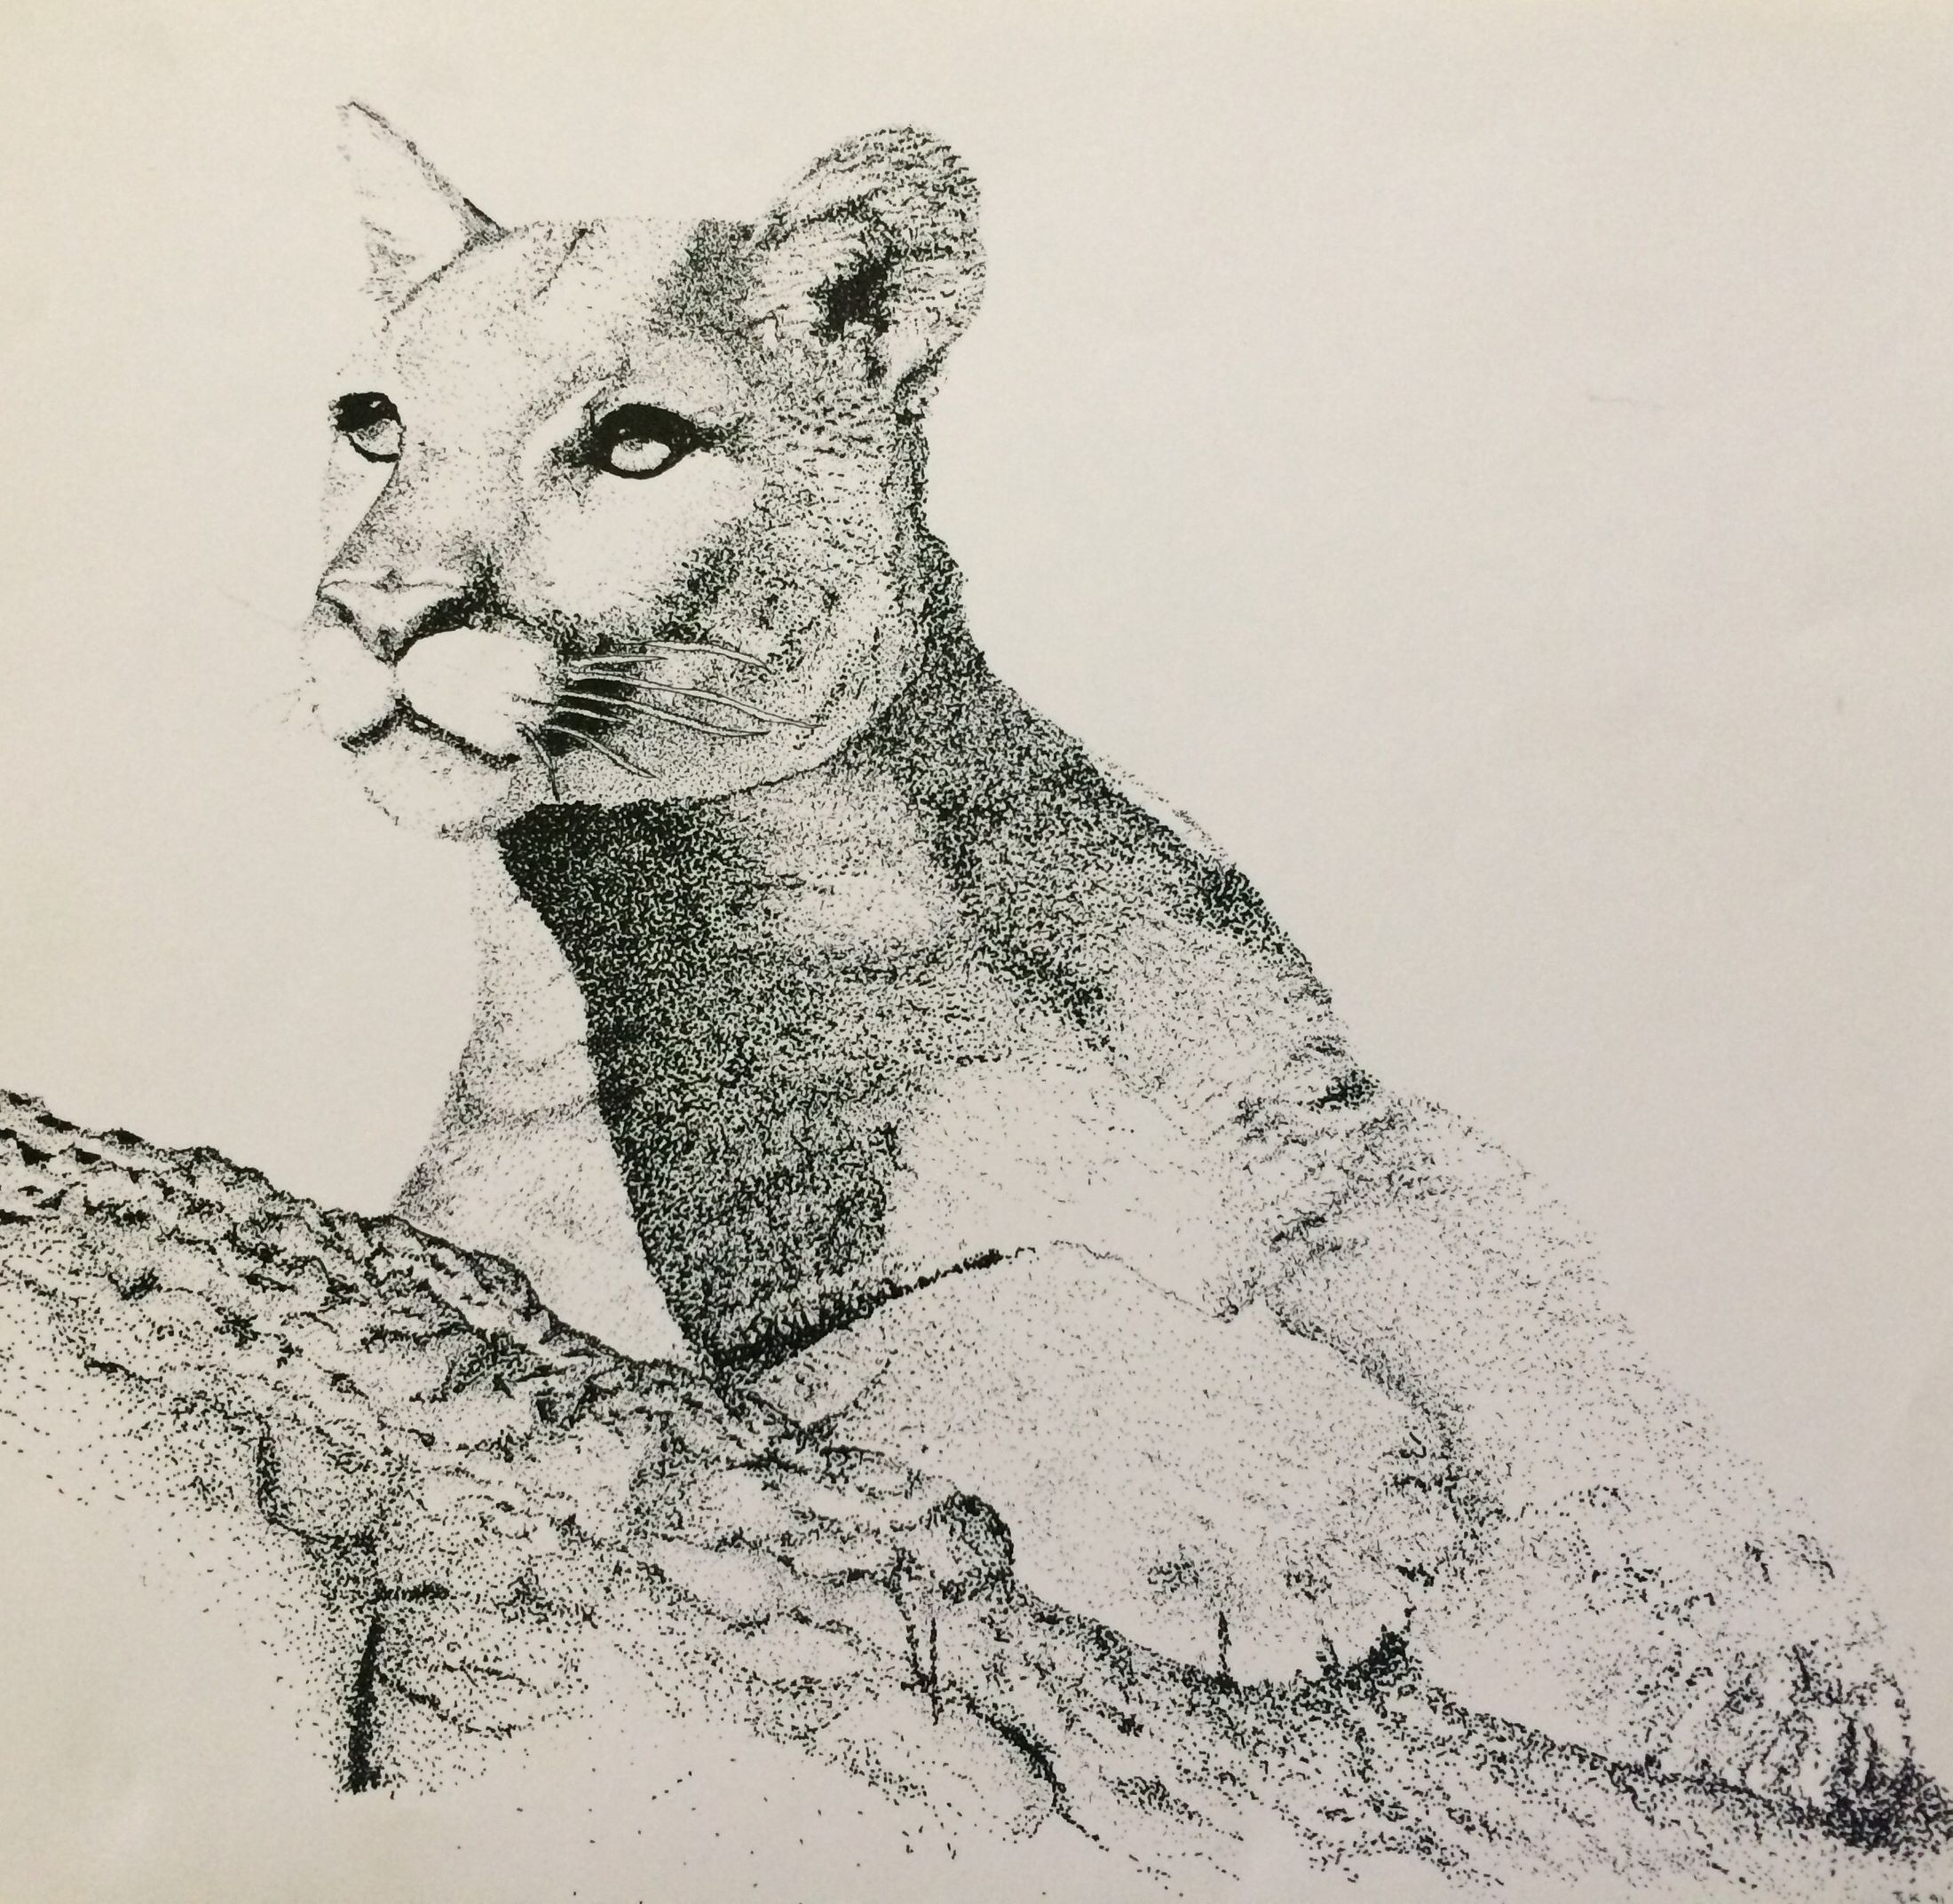 https://cdn.artinlee.org/wp-content/uploads/2018/07/Spry-Drawing-Animals-photo-panther.jpg